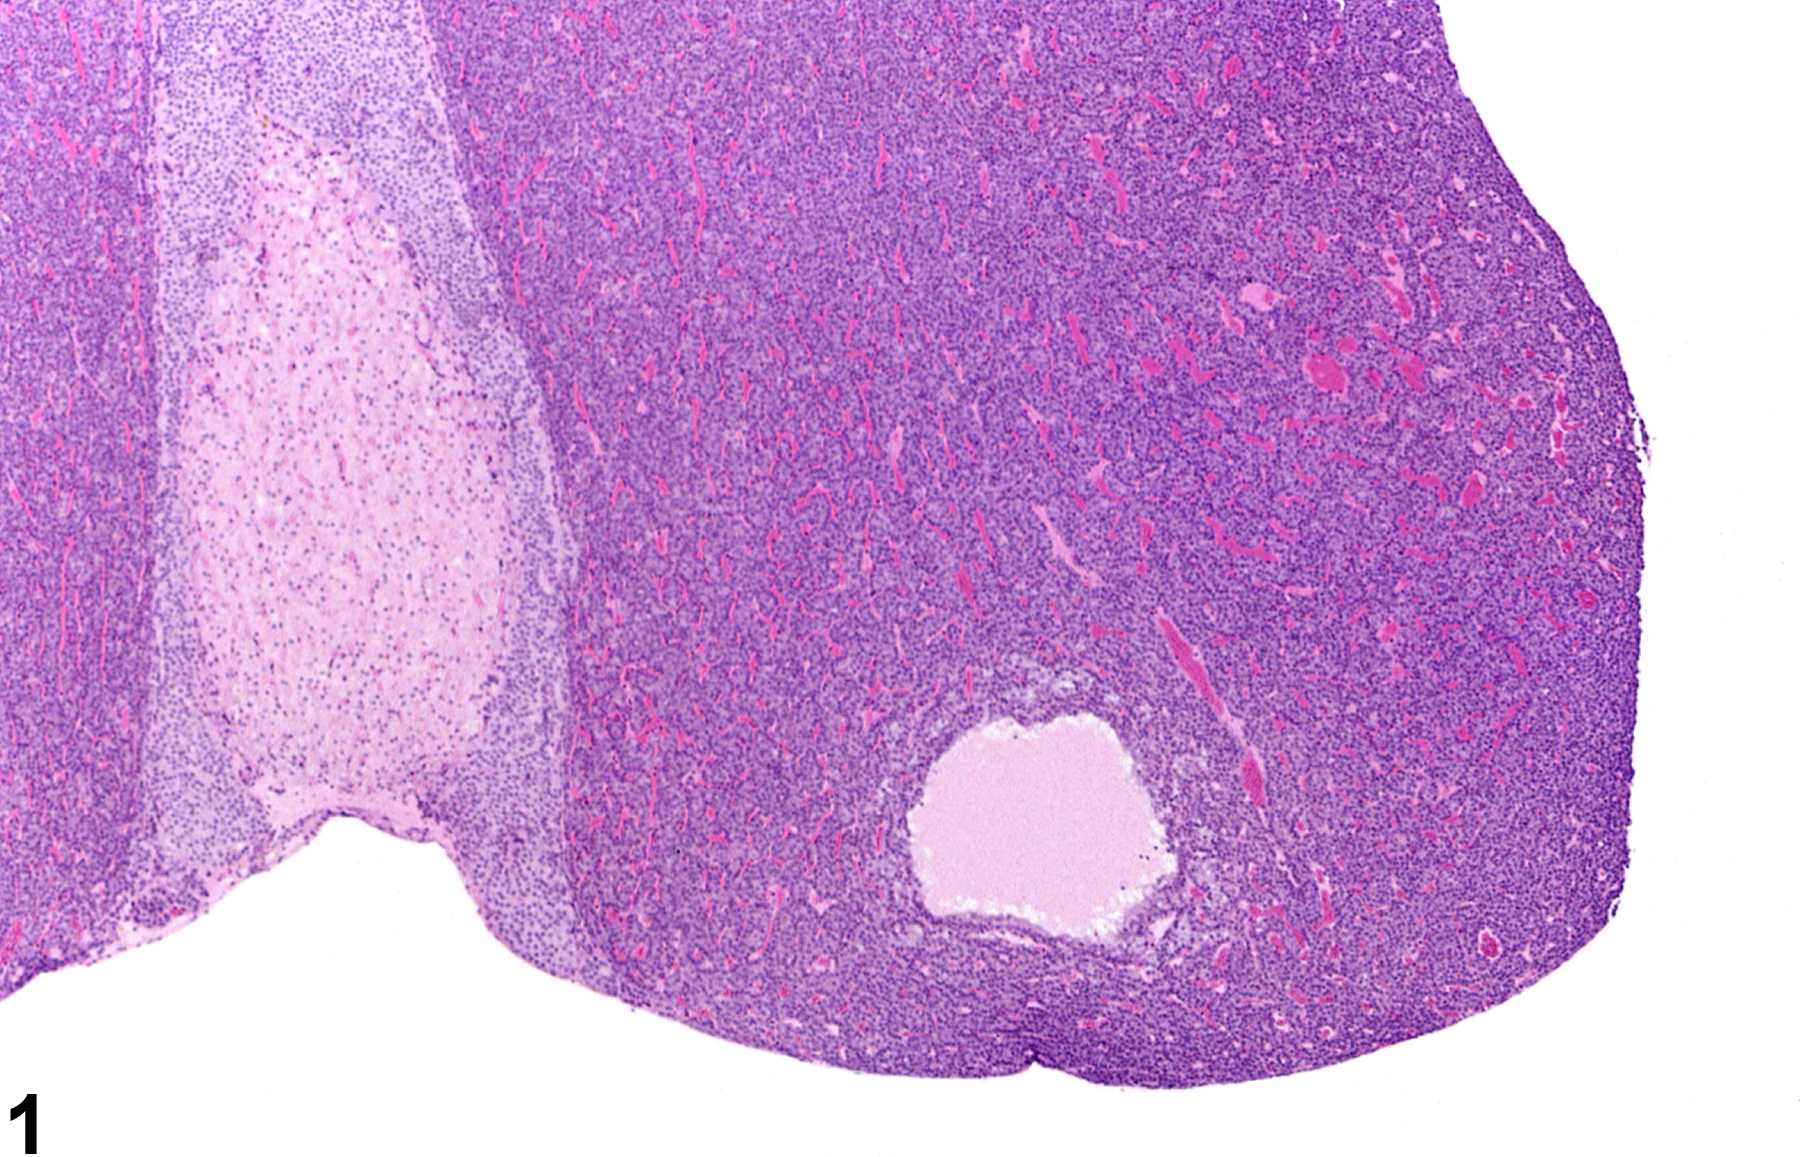 Image of cyst in the pituitary gland from a female Harlan Sprague-Dawley rat in a chronic study